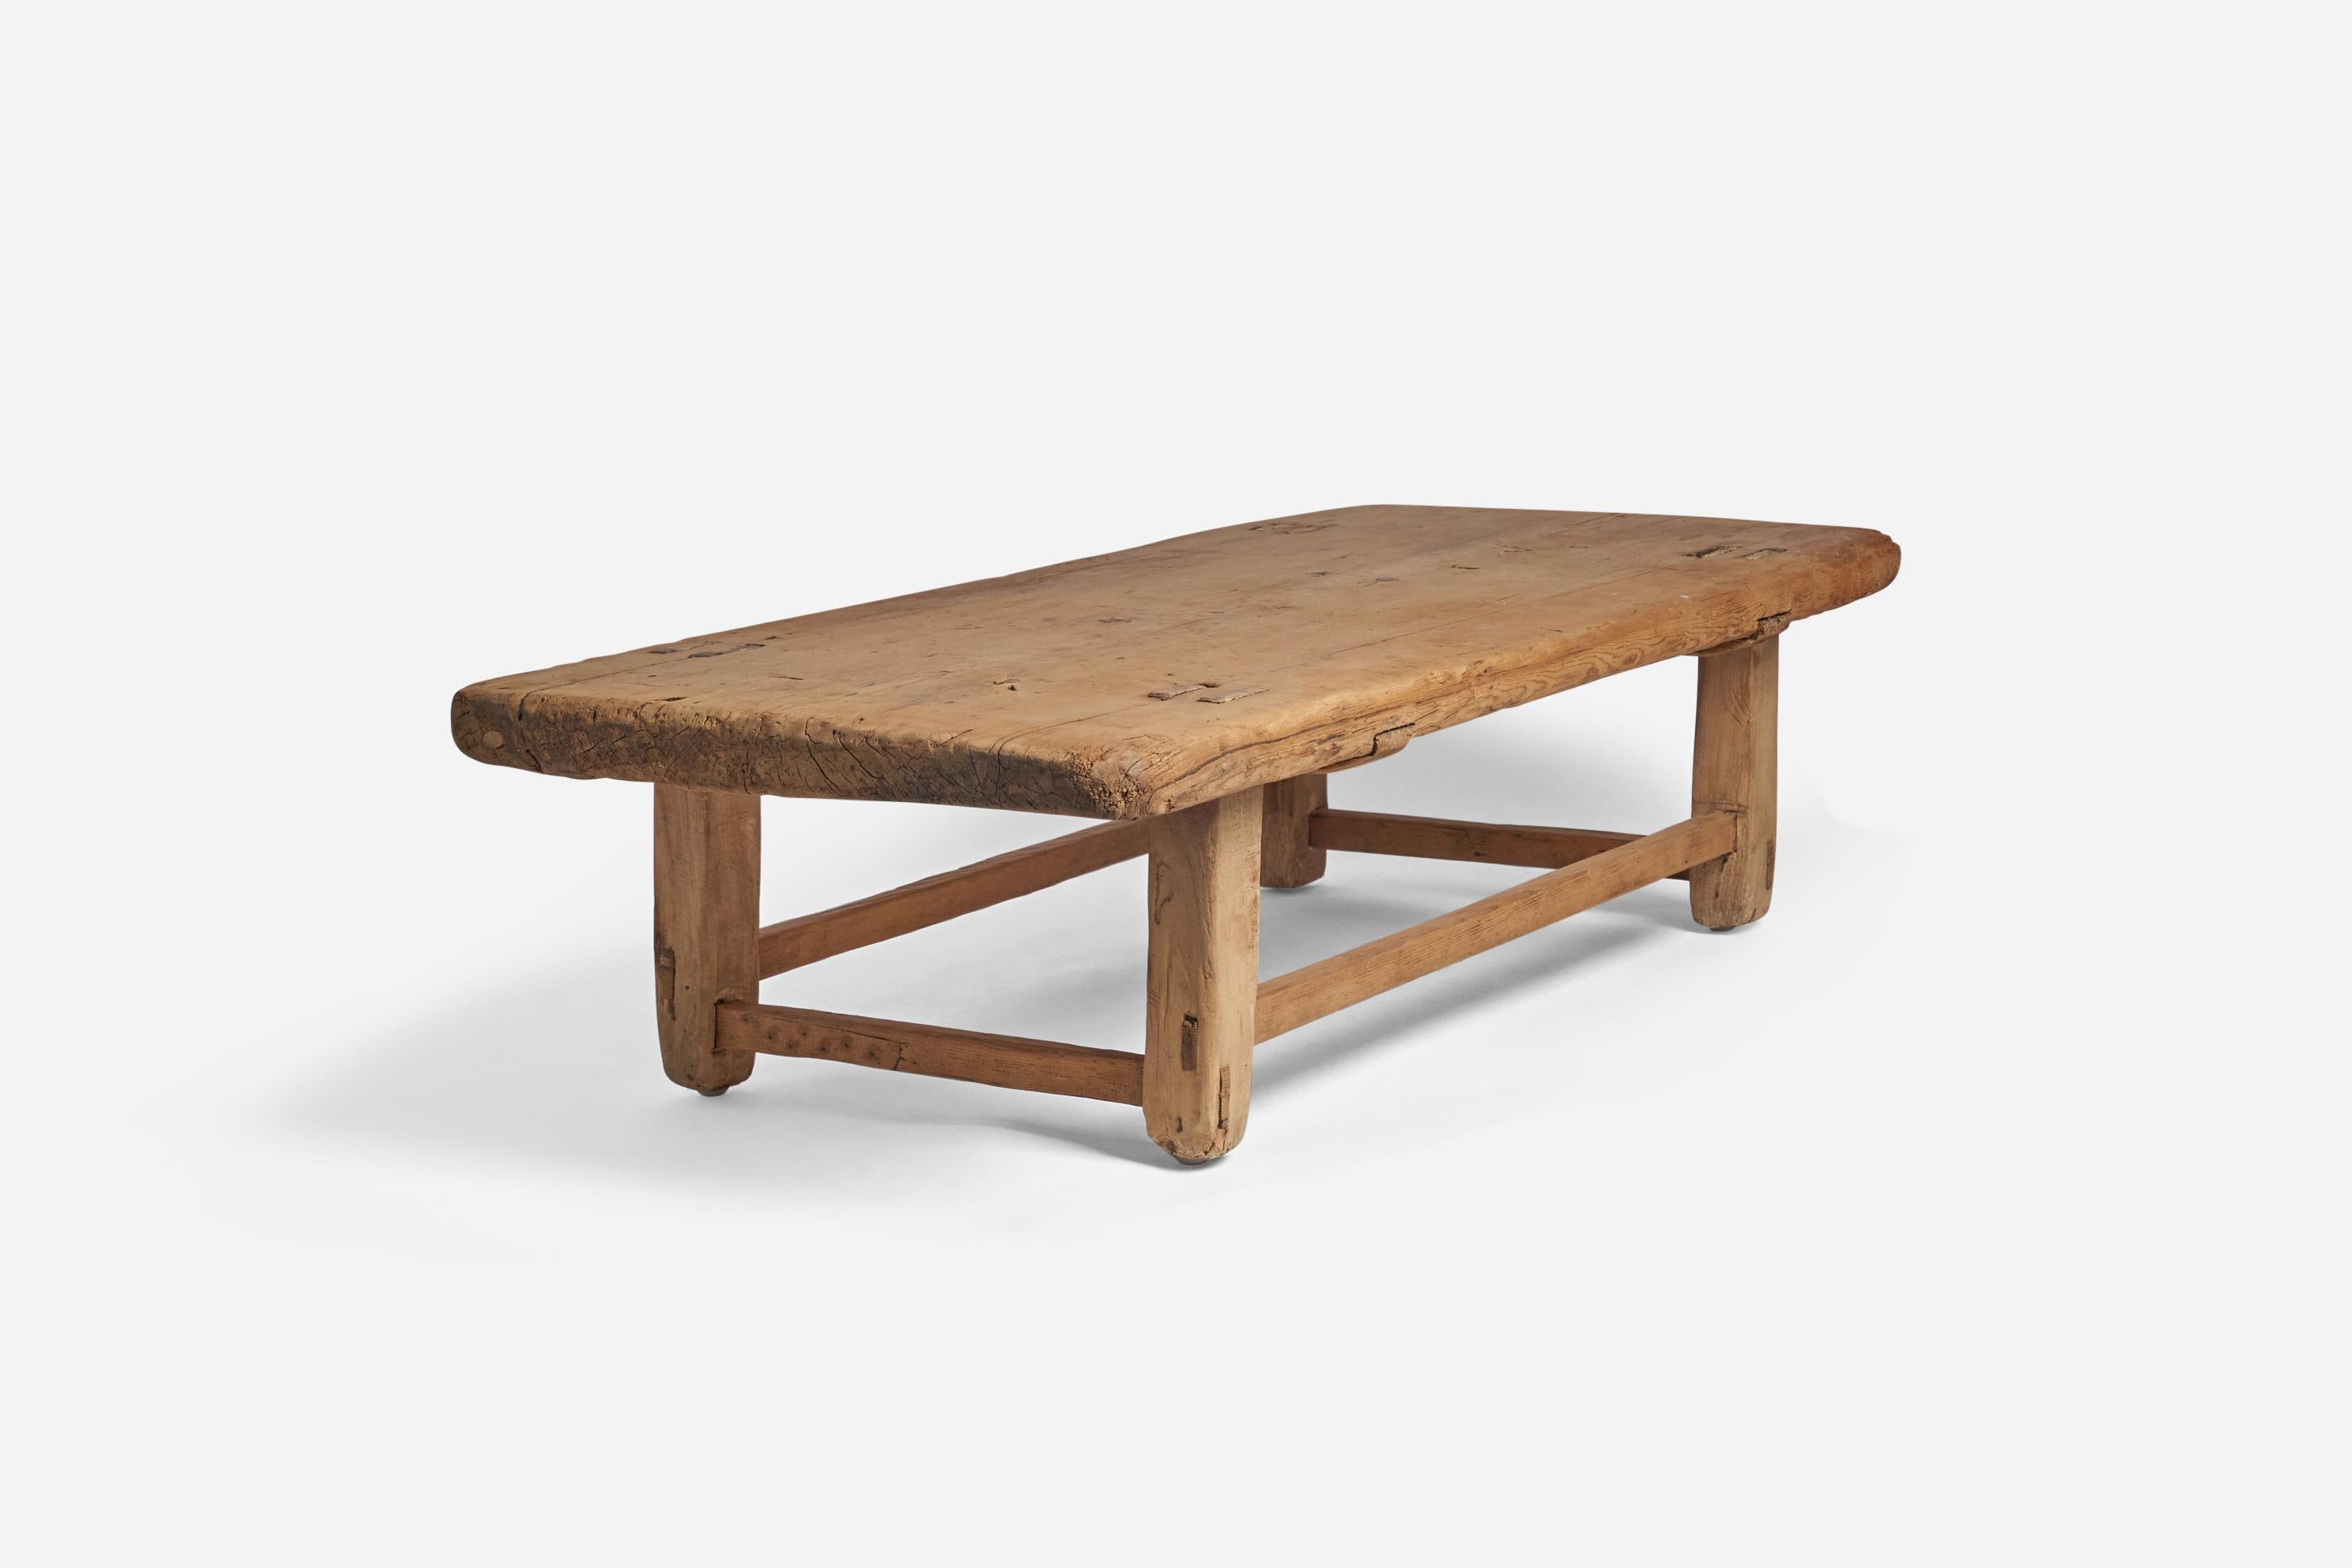 A pine low table or bench designed and produced in Sweden, c. 1900. 